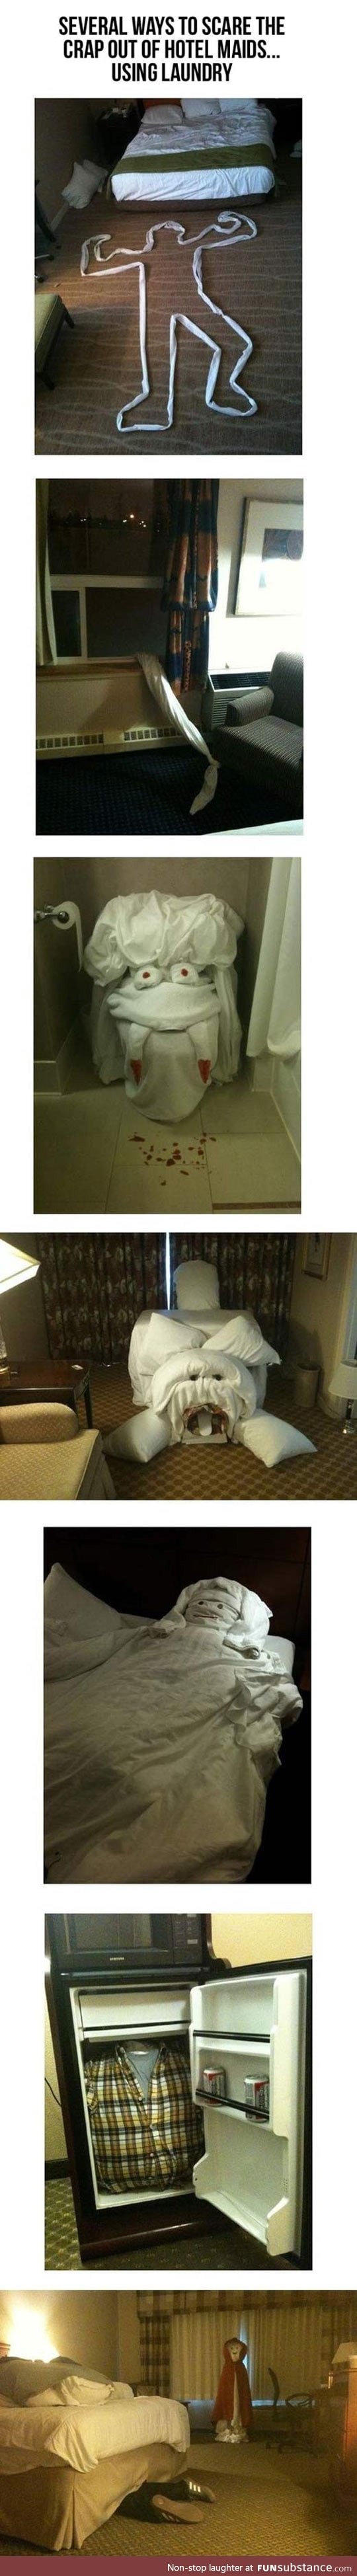 Before you leave your hotel room